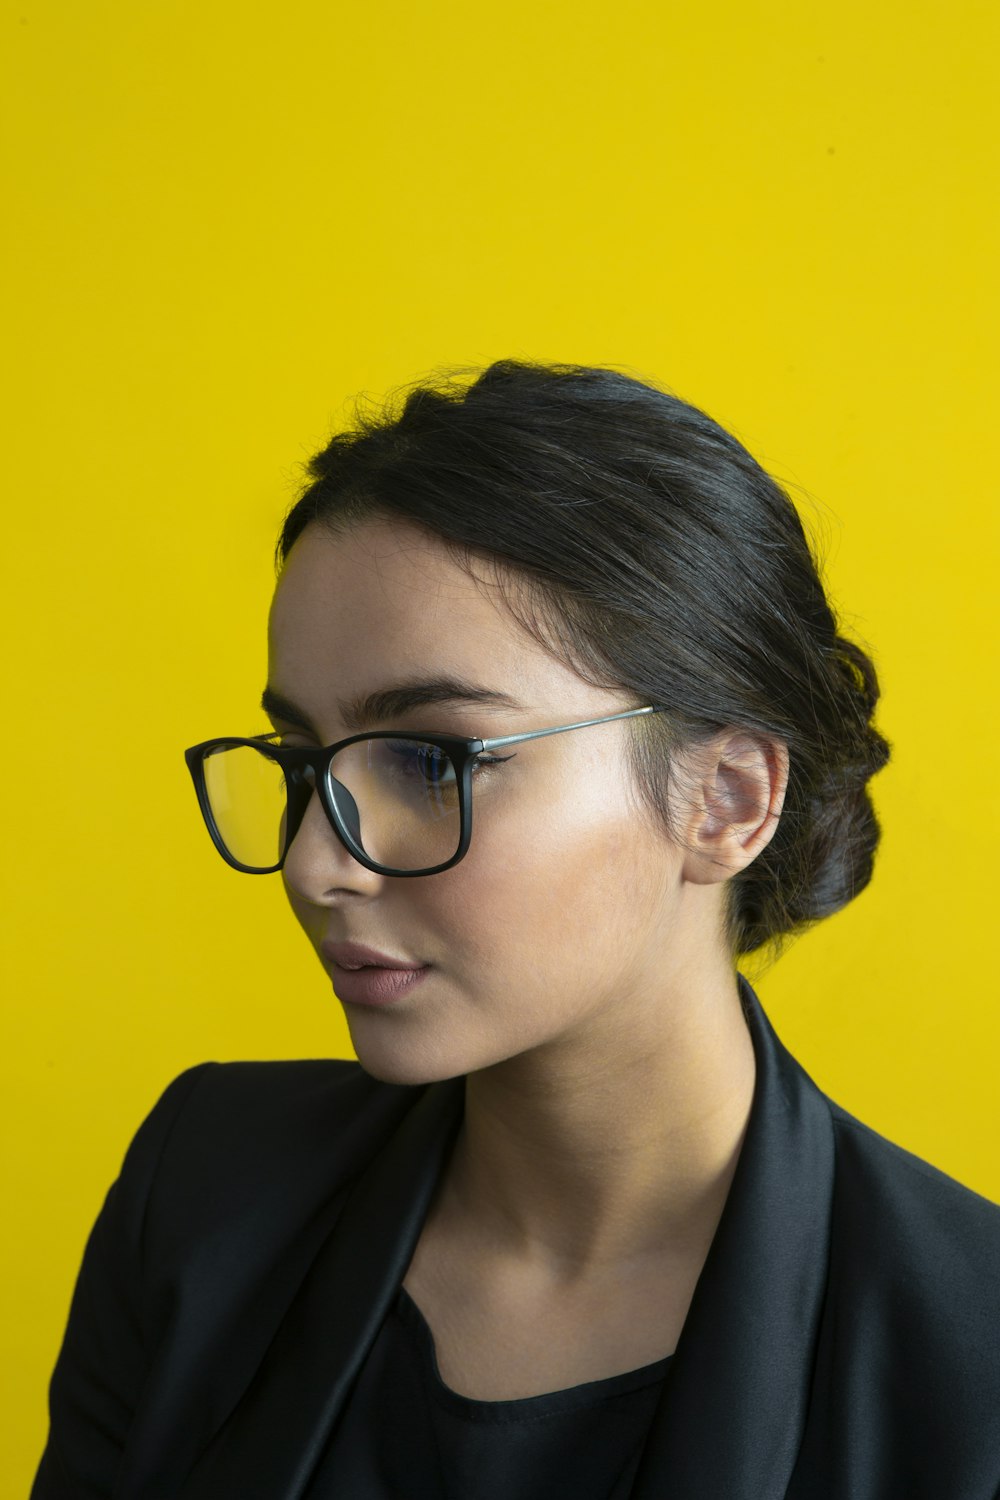 a woman wearing glasses against a yellow background